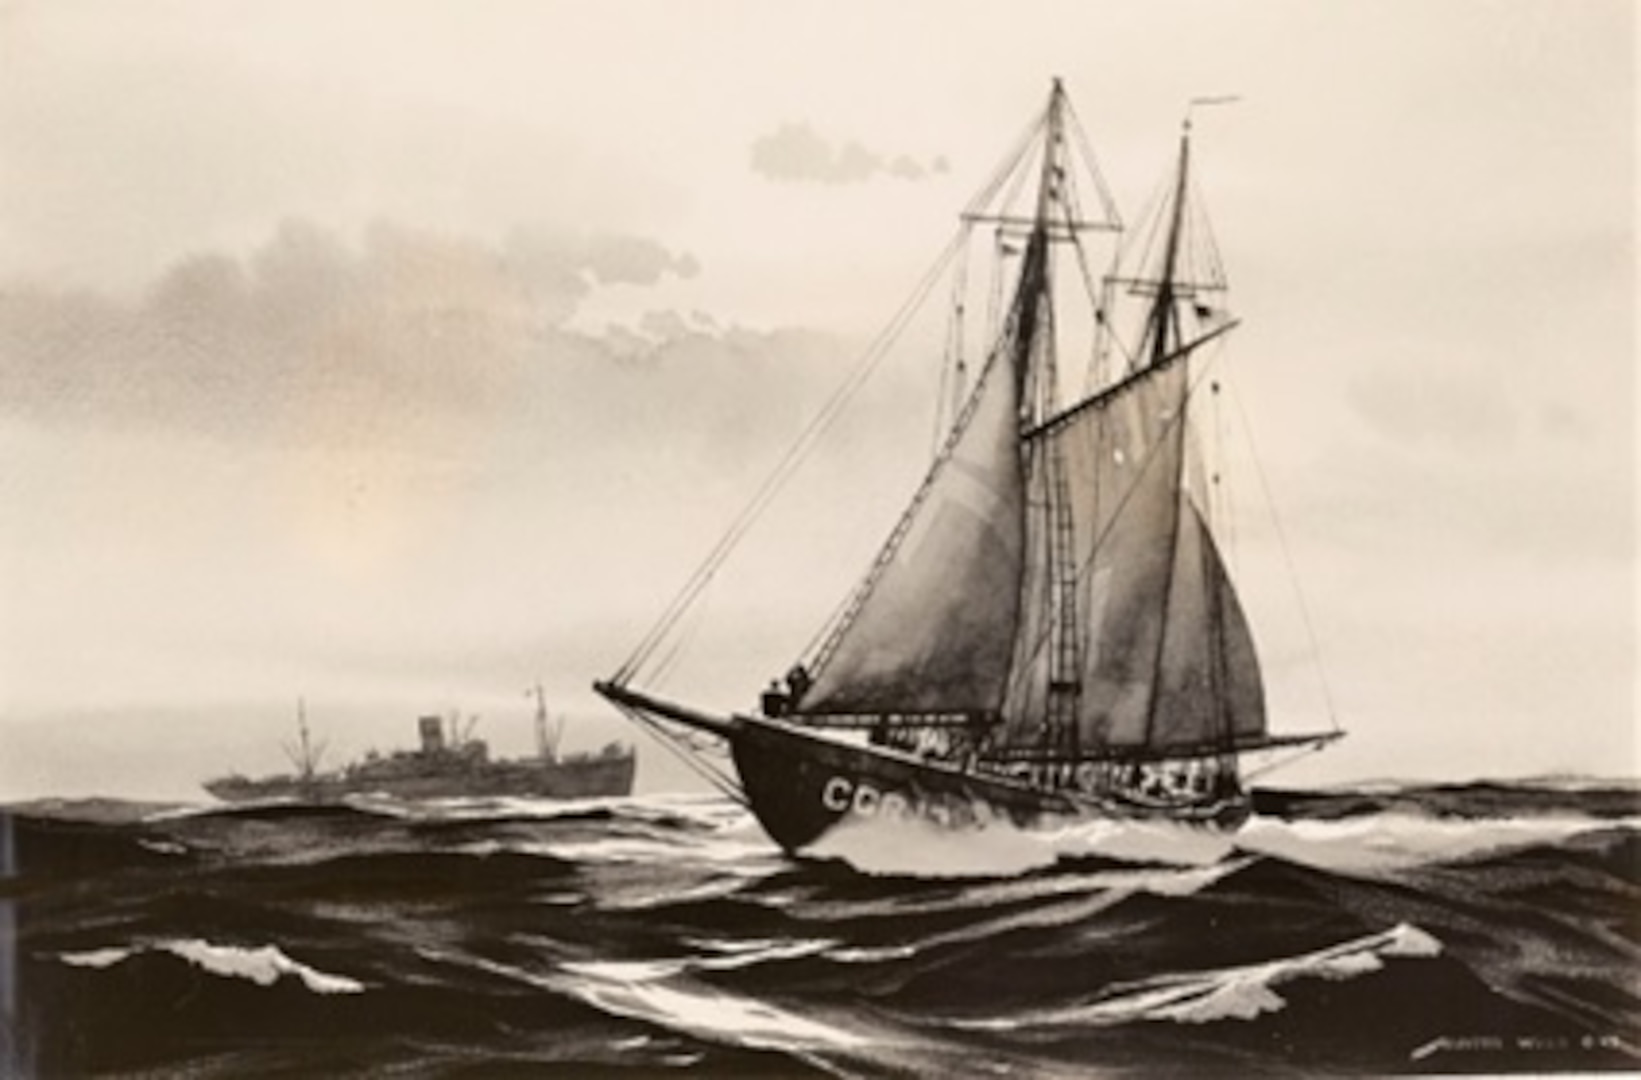 Photograph of watercolor titled “Eyes Off Shore,” which shows a Coast Guard Reserve schooner of the Corsair Fleet, by Coast Guard artist Hunter Wood. (National Archives and Records Administration, 205575831)